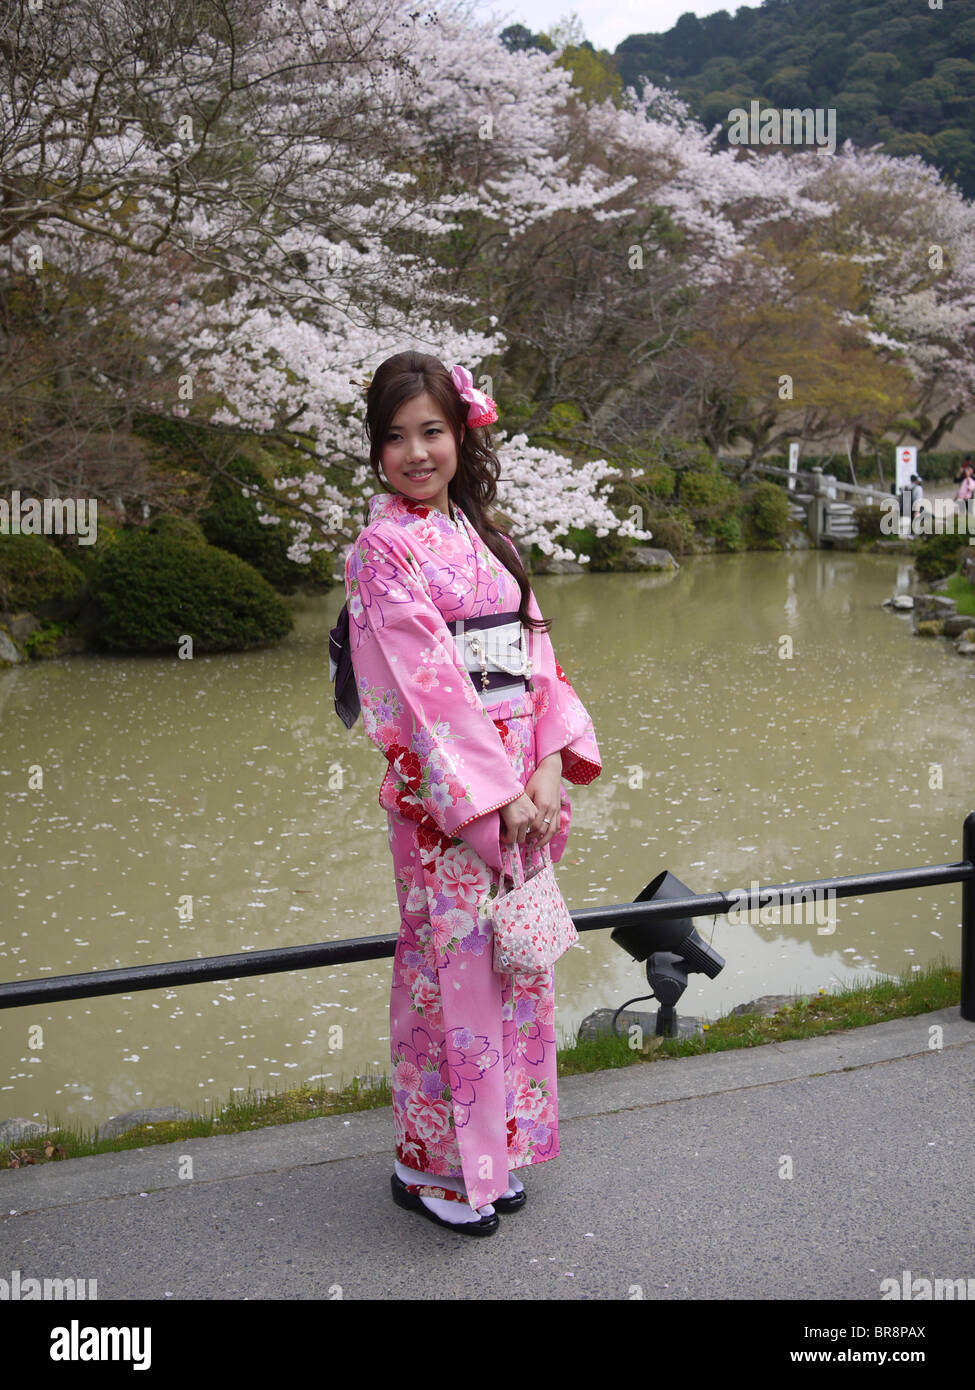 Japan, Honshu, Kyoto, Kiyomizu-Dera temple, Japanese woman in traditional Kimono stands in front of Cherry Blossoms Stock Photo